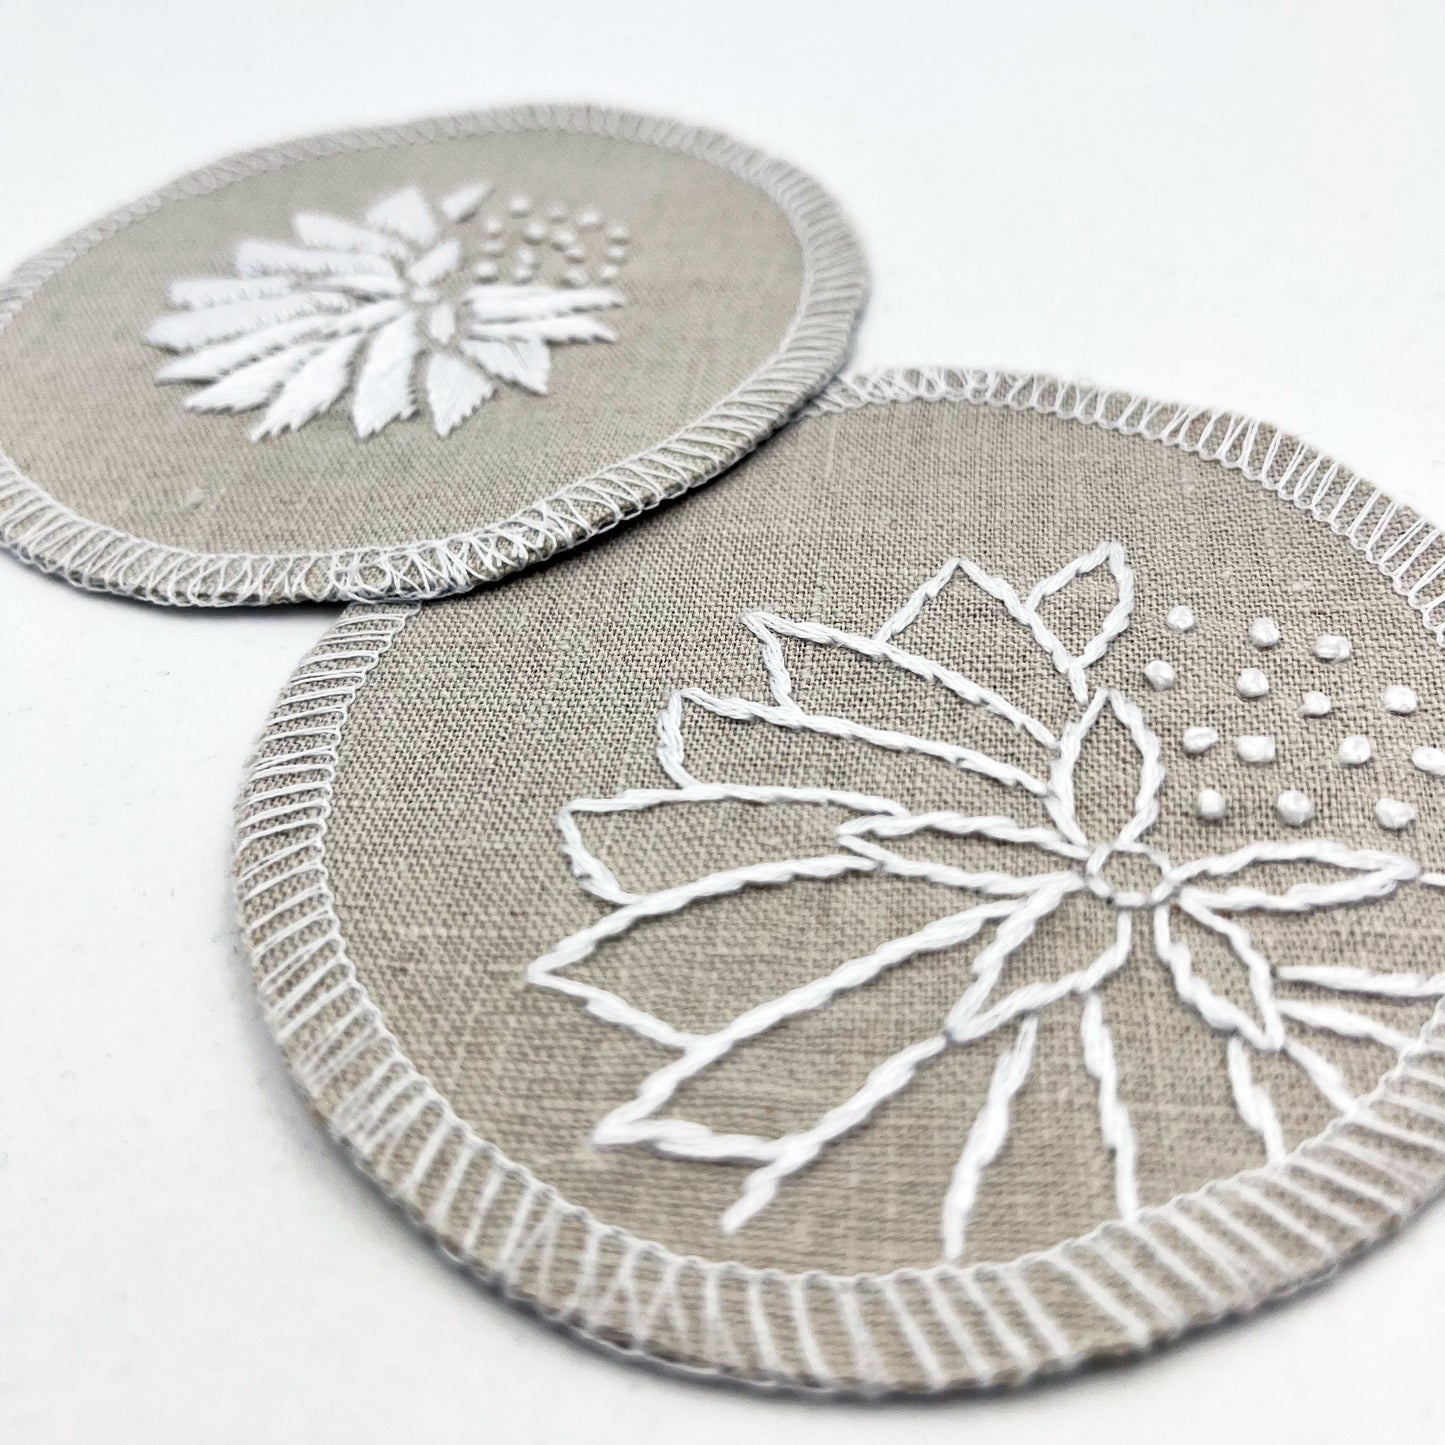 two circle shaped patches made out of natural colored cotton linen fabric, hand embroidered with abstract dandelions in white floss, one with solid filled petals, the other with outlines of petals, edges overlocked in white, on a white background